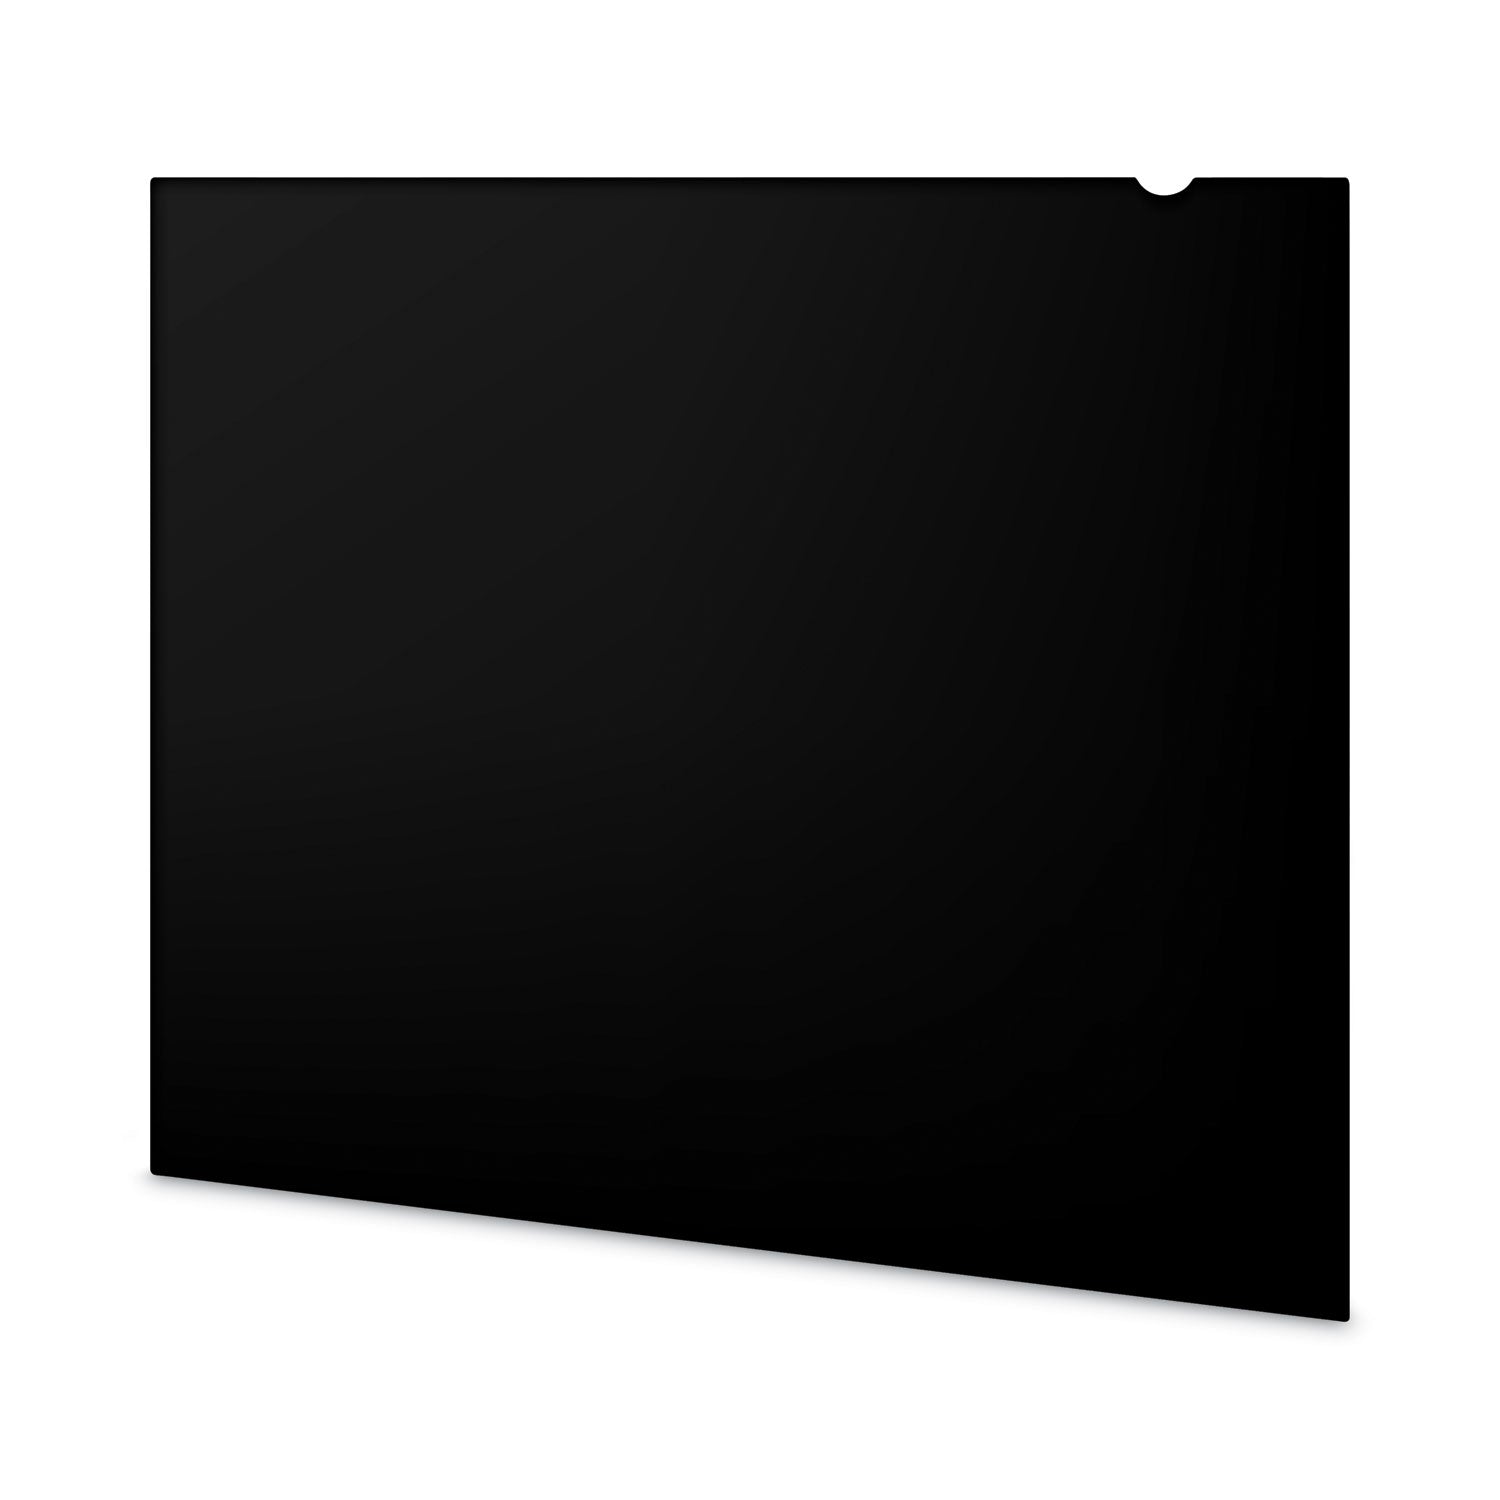 Blackout Privacy Filter for 24" Widescreen Flat Panel Monitor, 16:9 Aspect Ratio - 